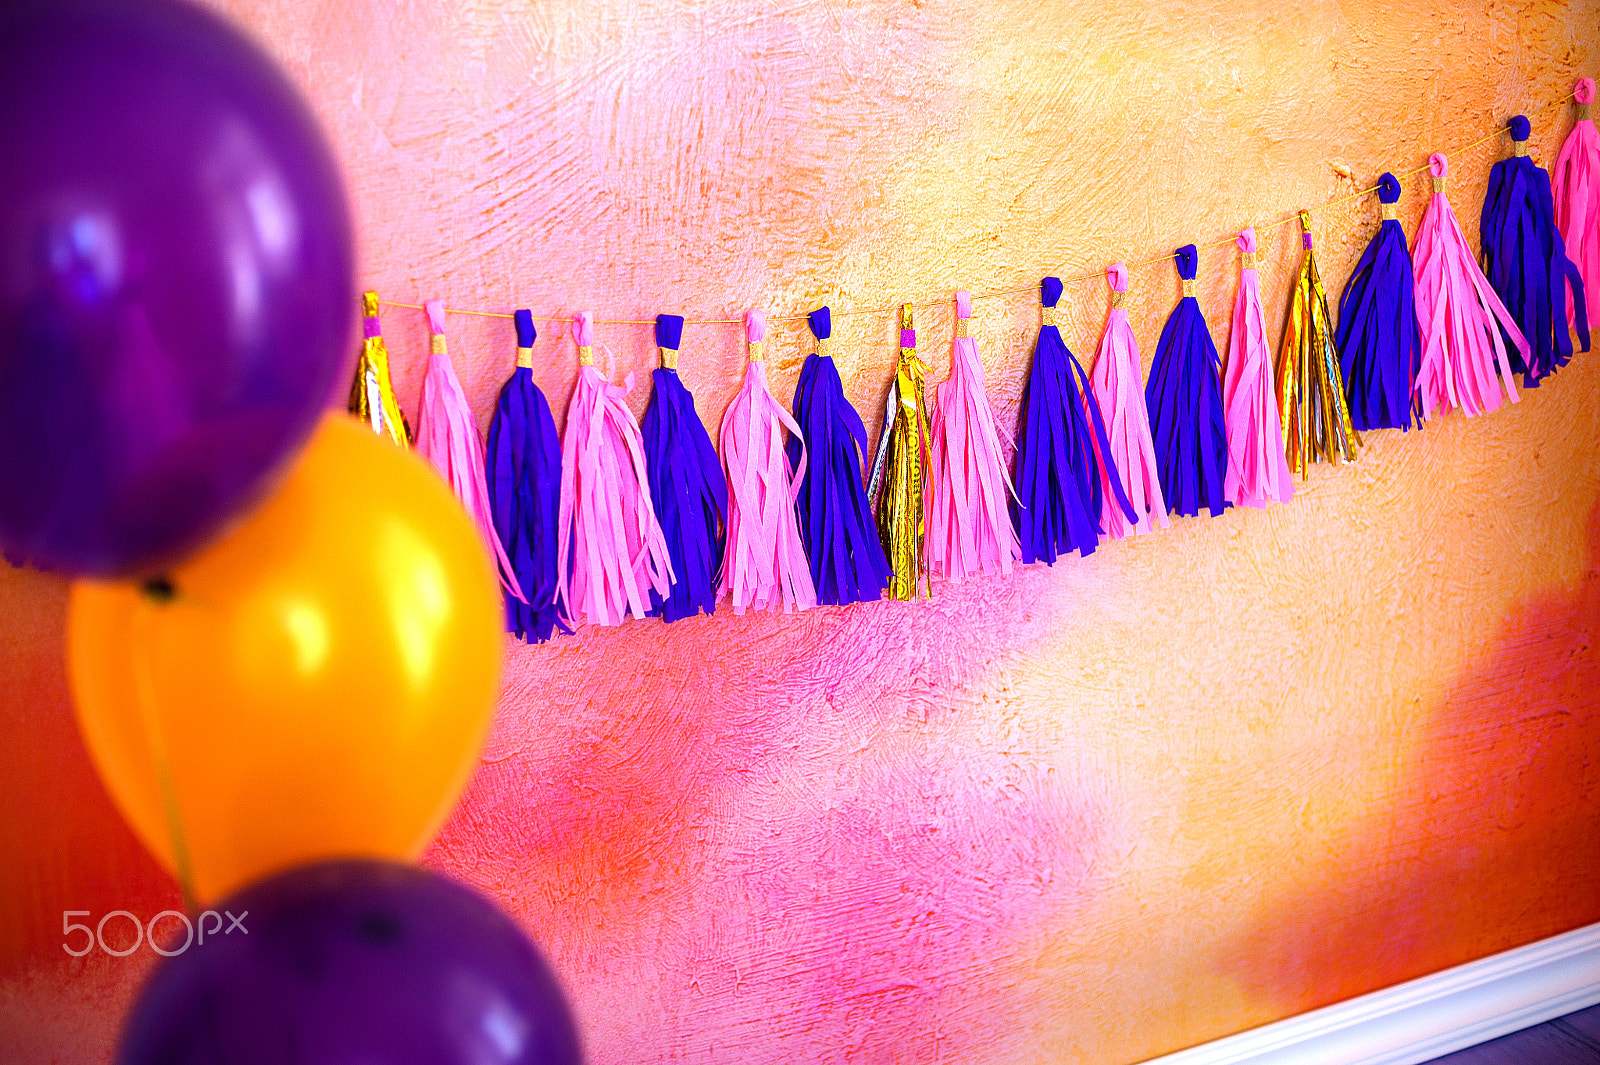 Nikon D700 sample photo. Beautiful decoration for birthday party. concept carnival photography